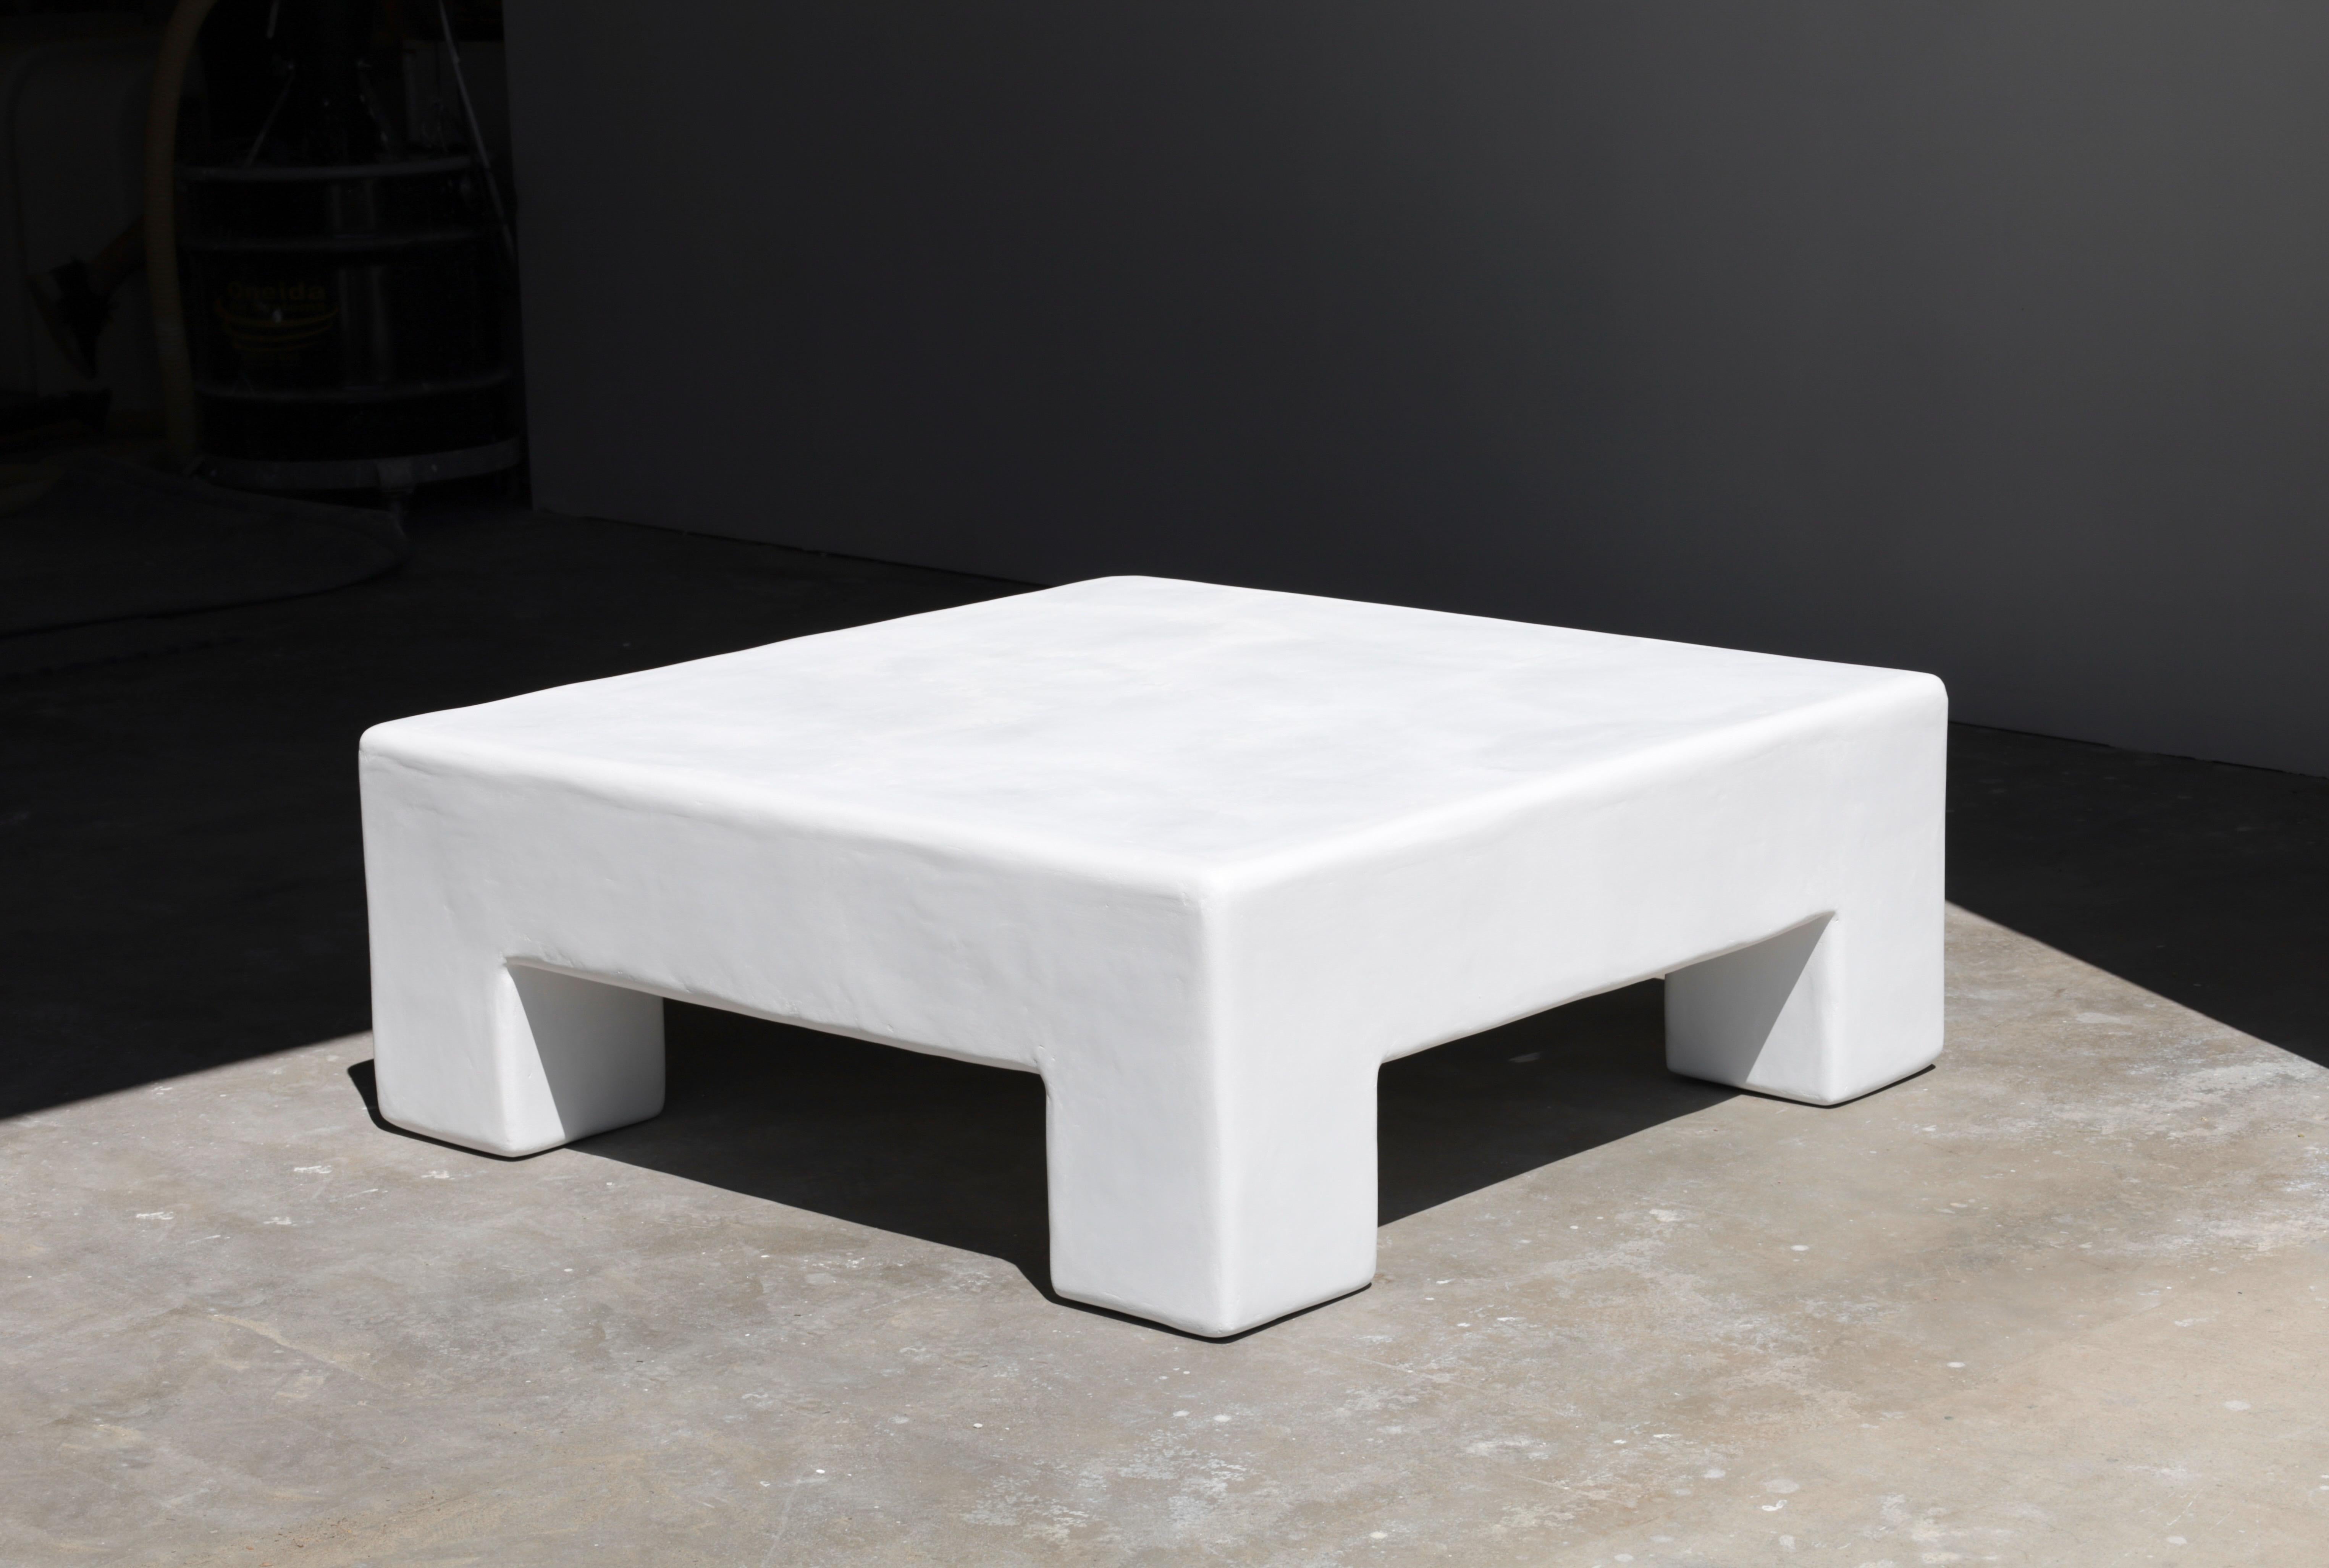 our signature coffee table, a simple and modern piece that will work with many decors, in the manner of Milo Baughman 

each öken house studio piece is handmade & made to order by a small team of plaster artisans and we try to utilize local vendors